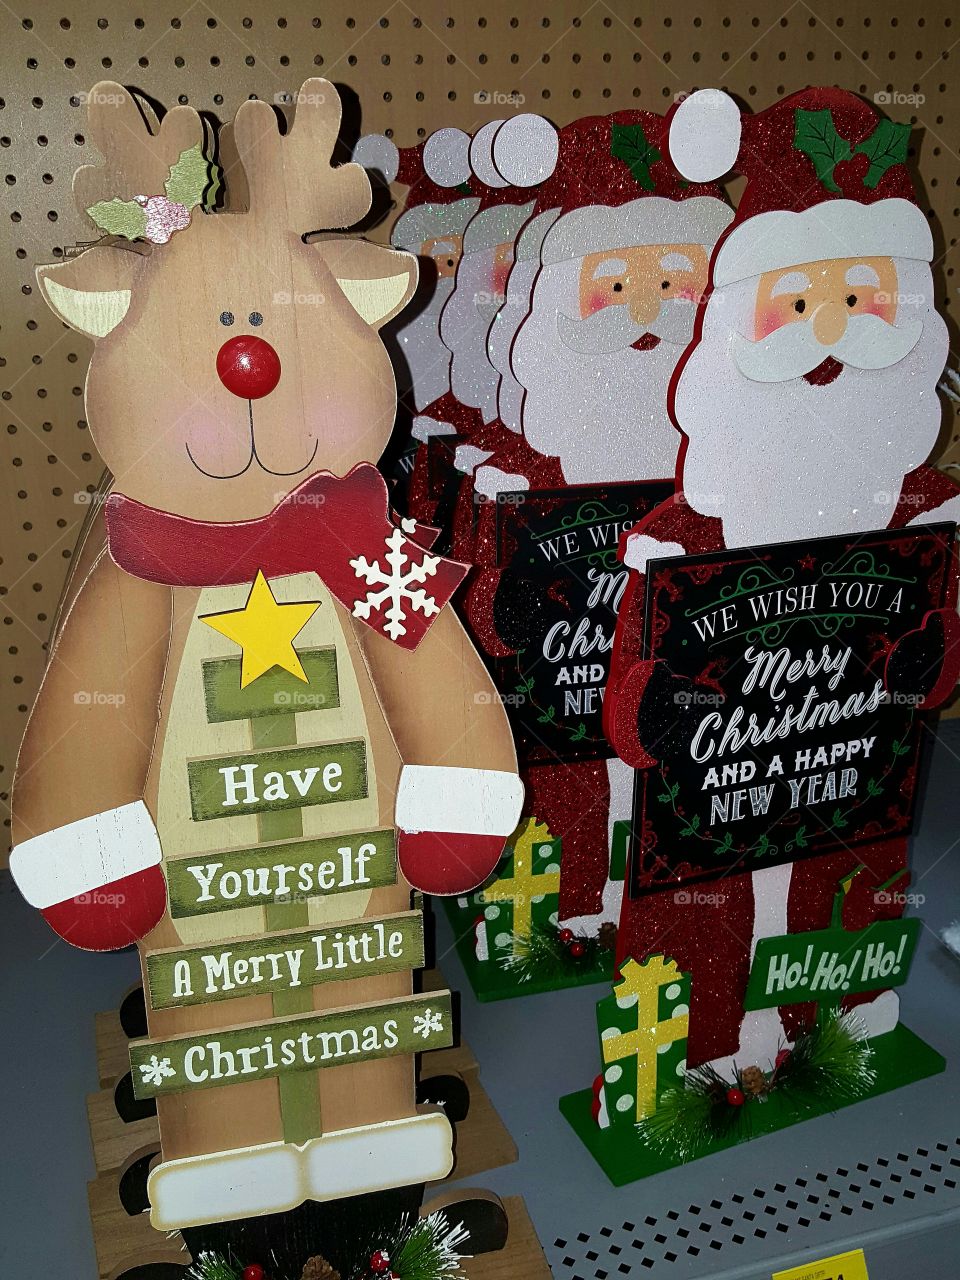 I saw these Christmas signs in the store today and was so tempted to buy one. I love reindeer and snowmen!